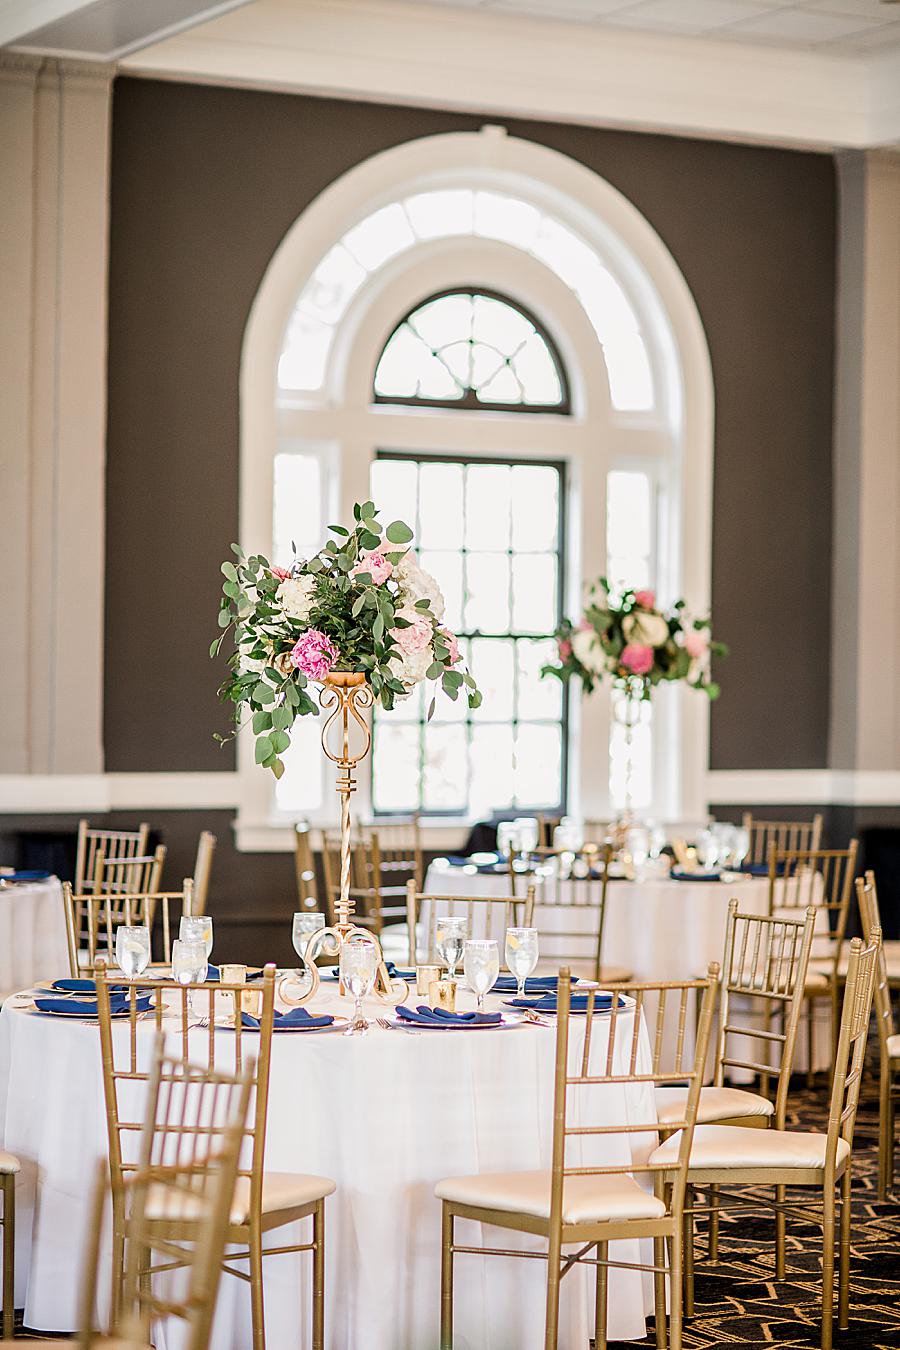 Naturally lit reception space at this The Olmsted Wedding by Knoxville Wedding Photographer, Amanda May Photos.